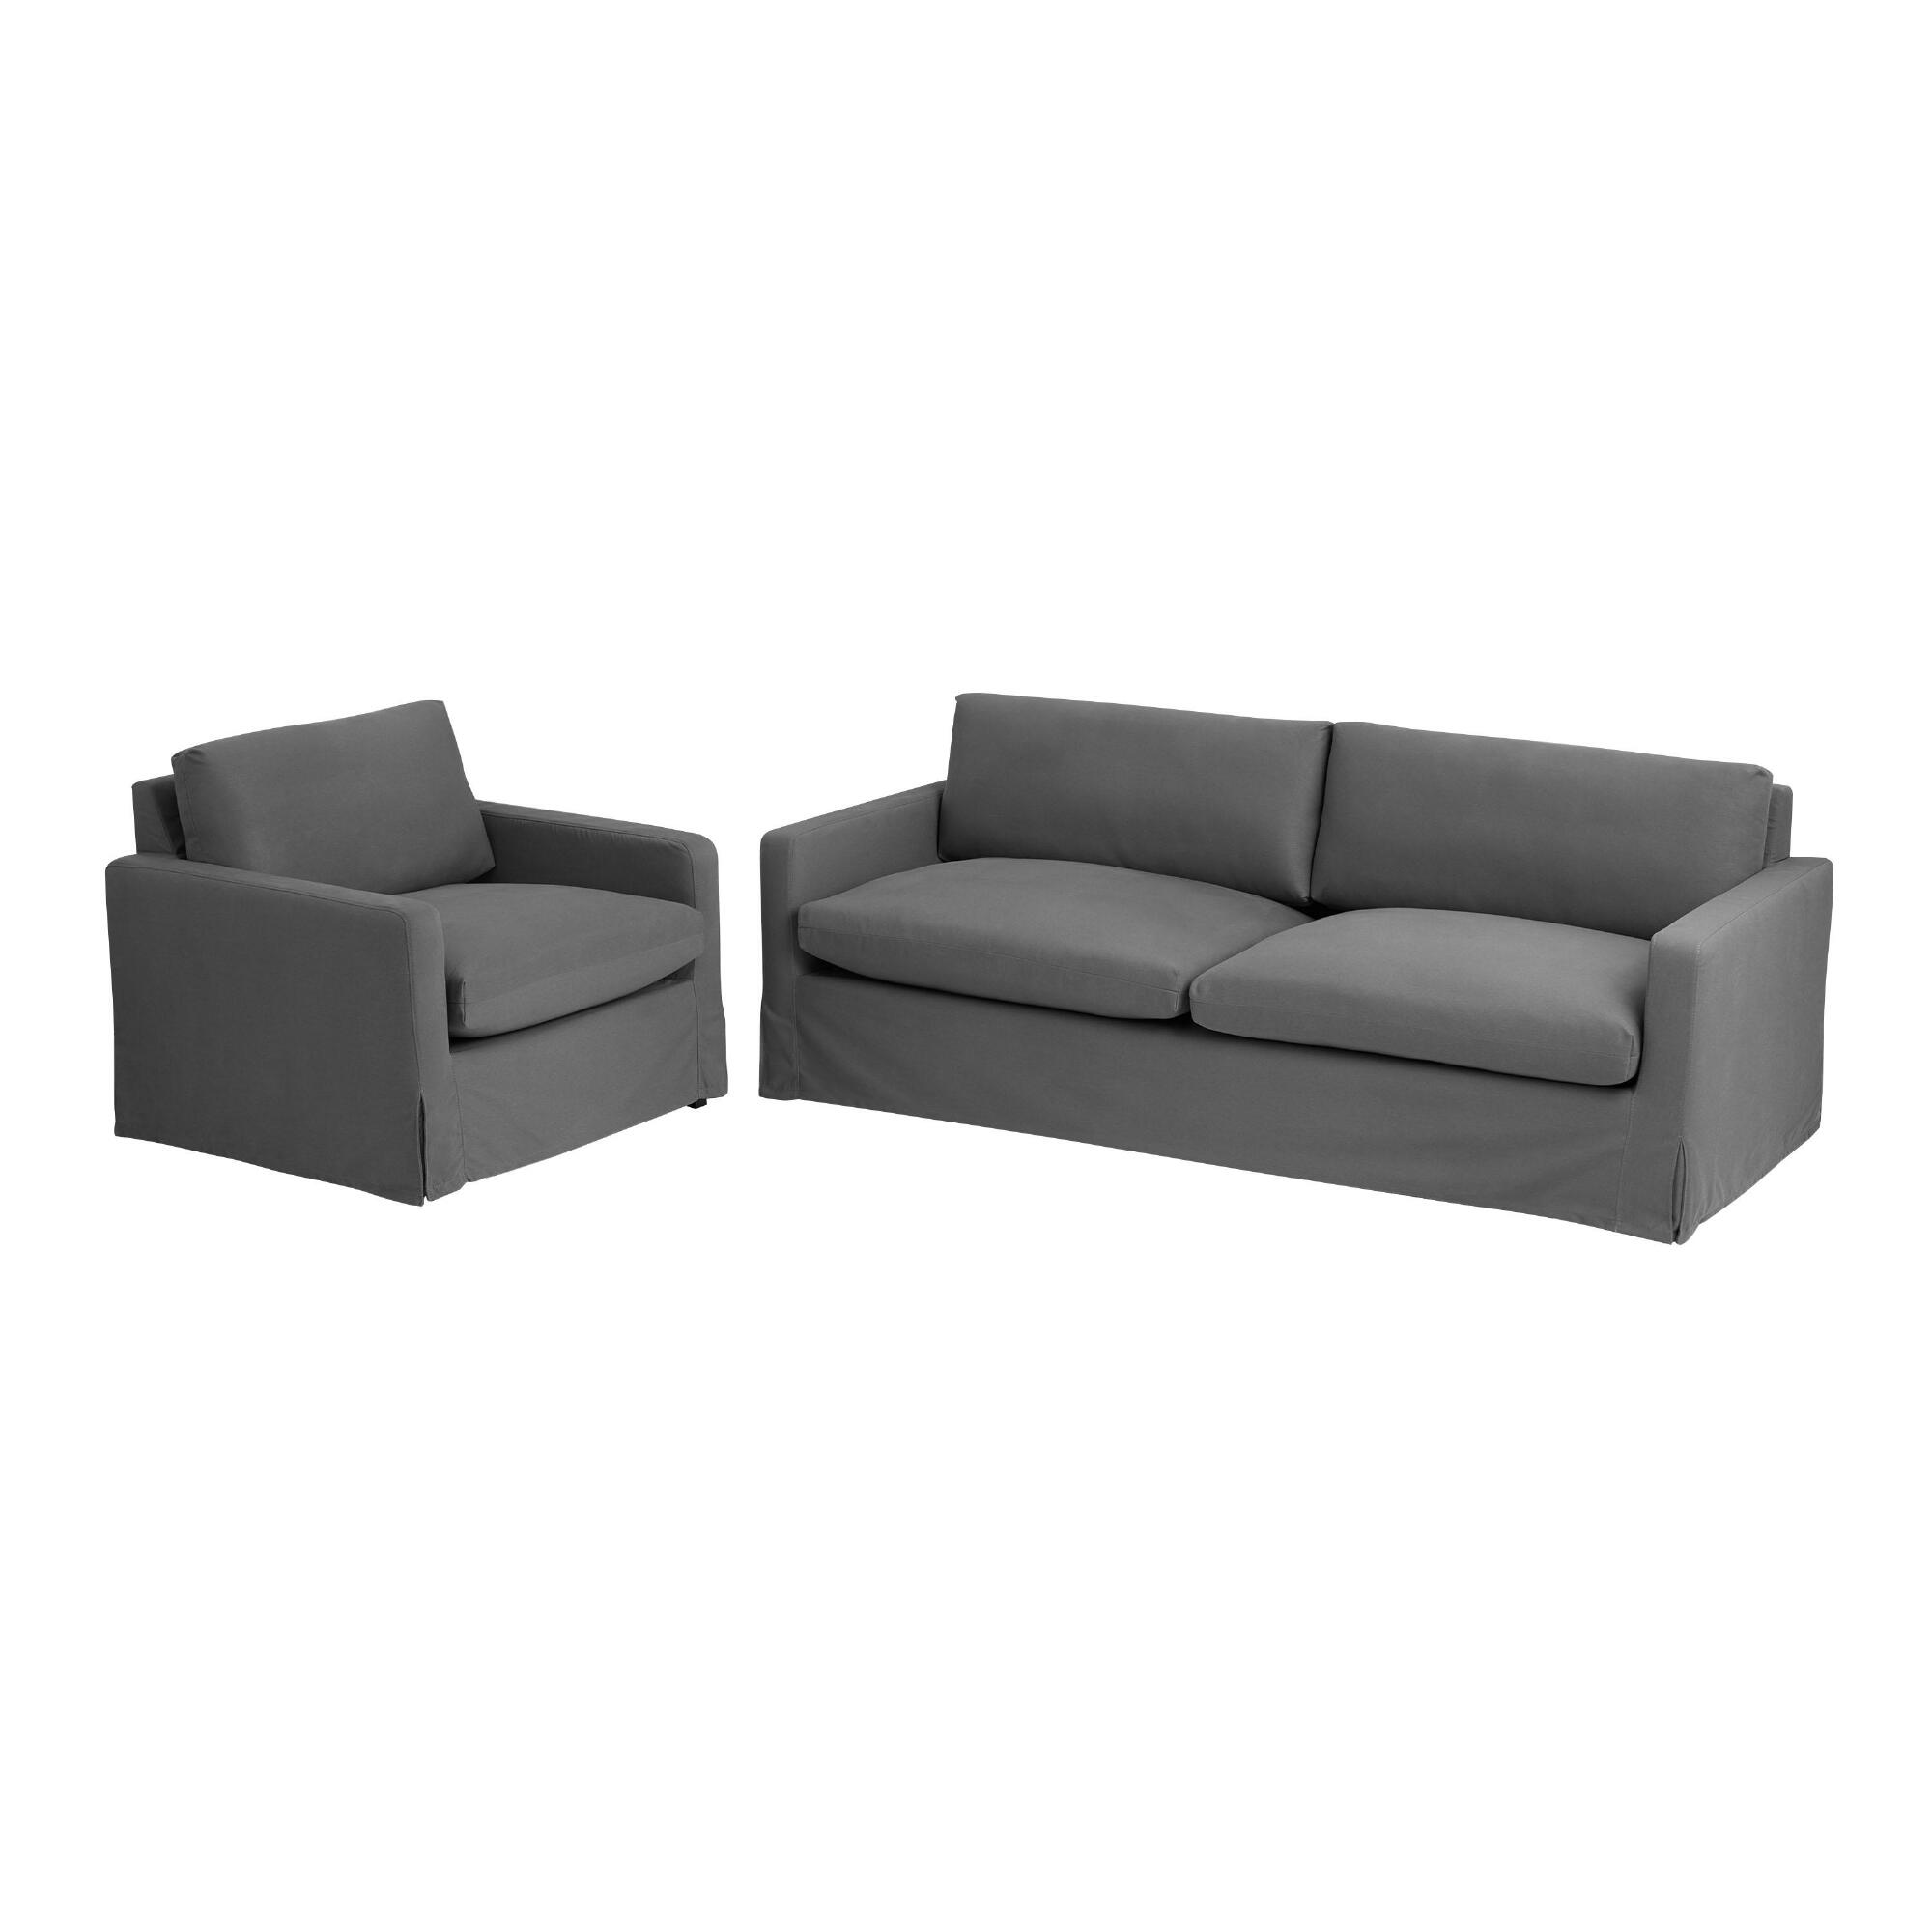 Chandler Slipcover Seating Collection by World Market